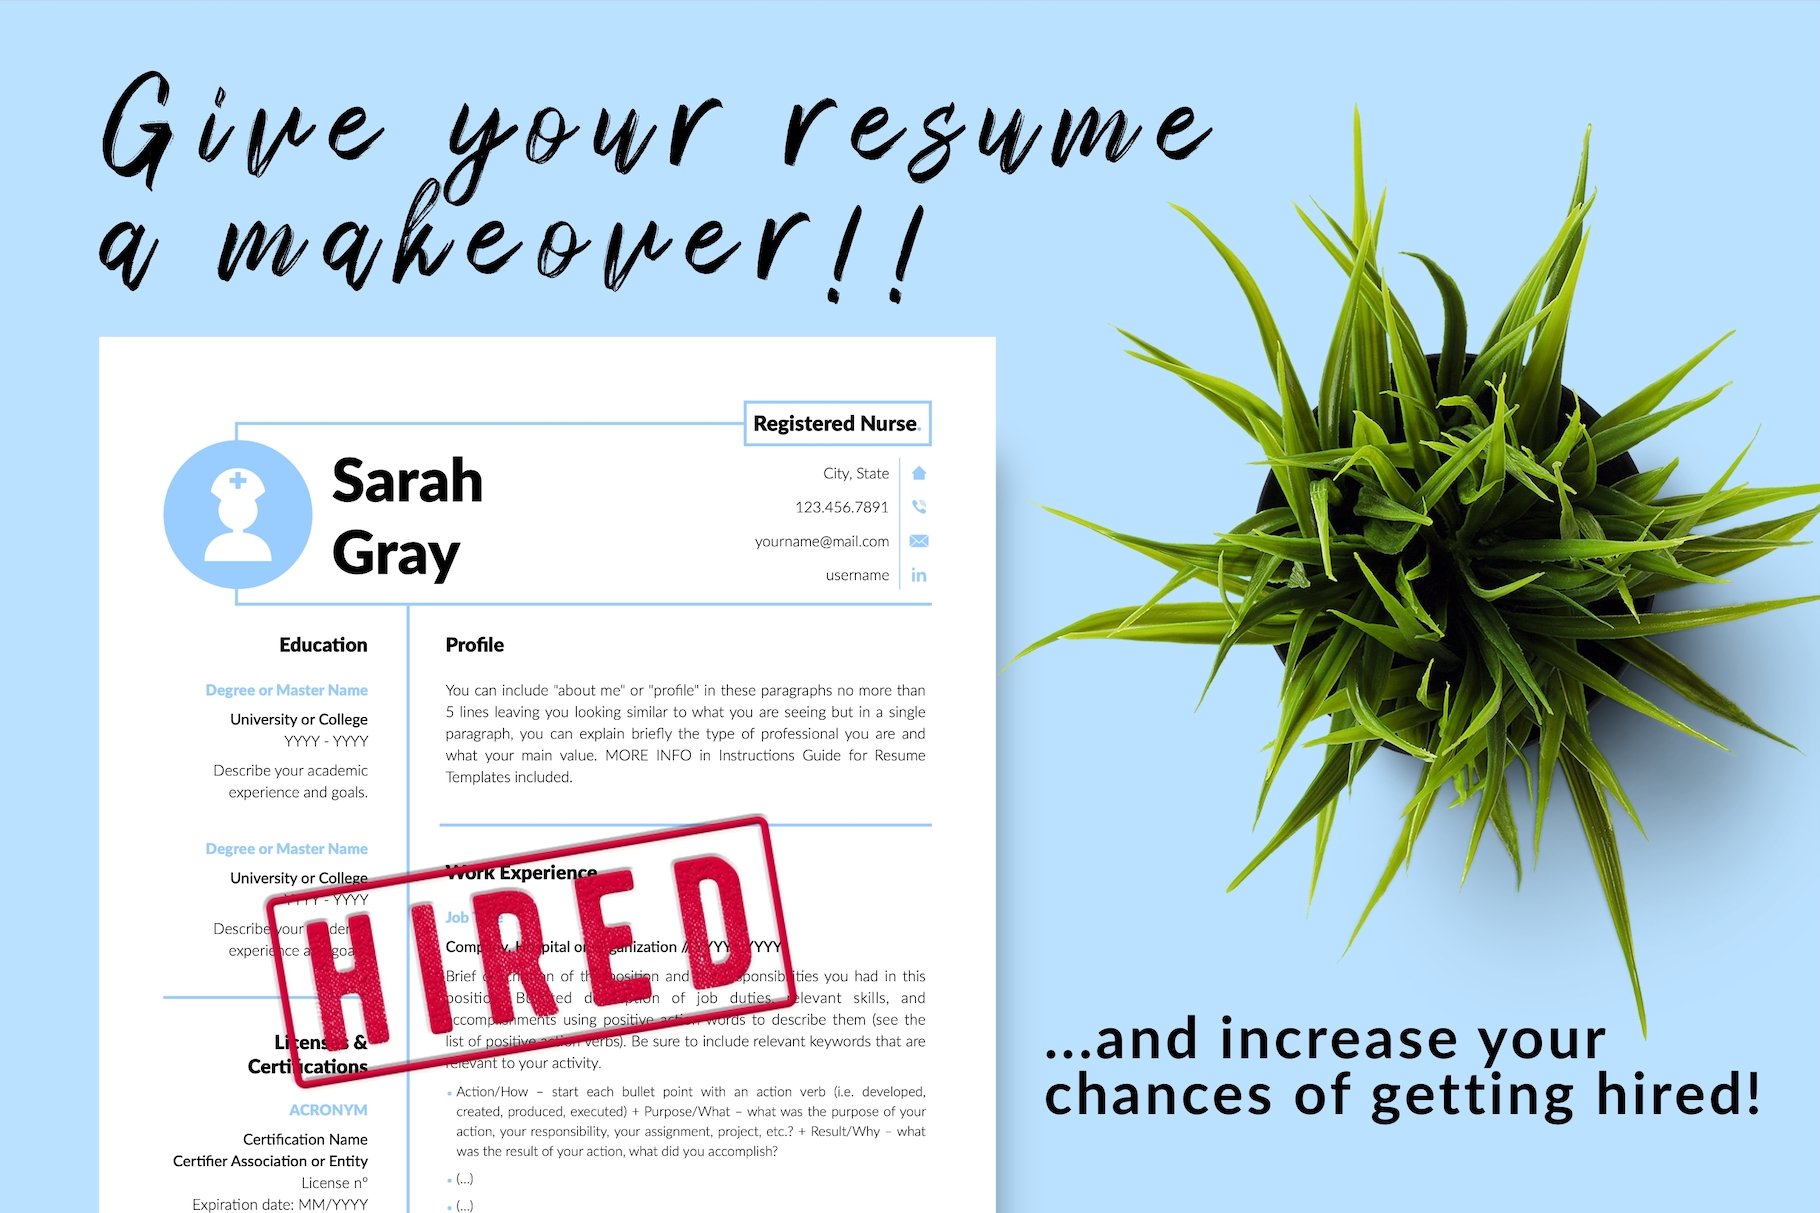 resume cv template sarah gray for creative market 16 give your resume a makeover 806